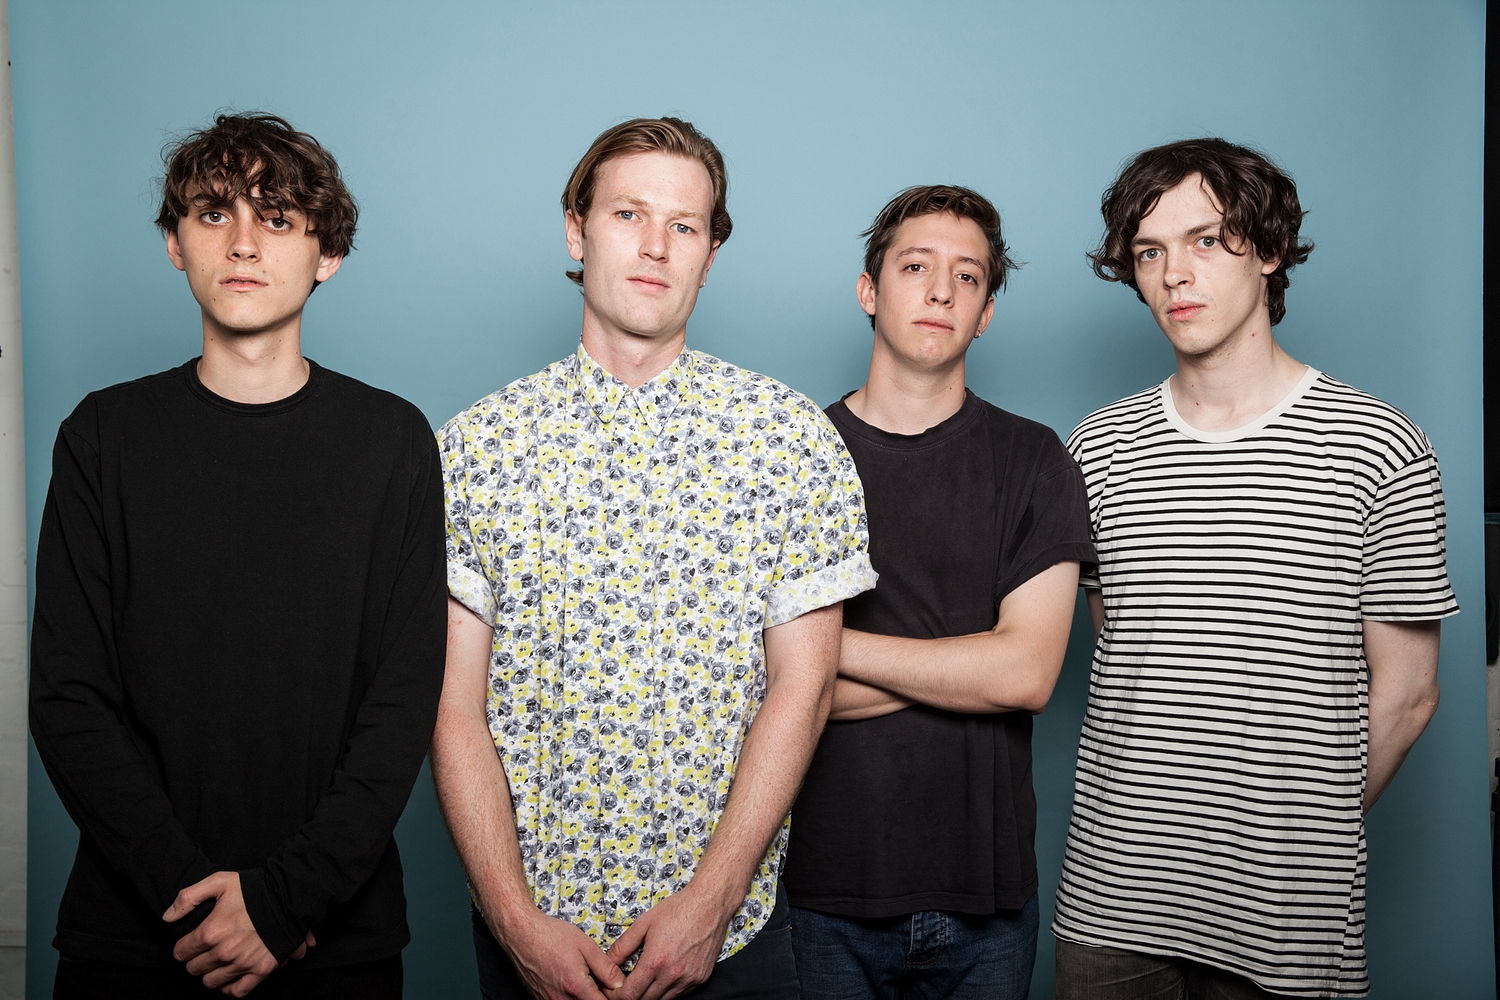 Gengahr: "It’s slowly building up to something"